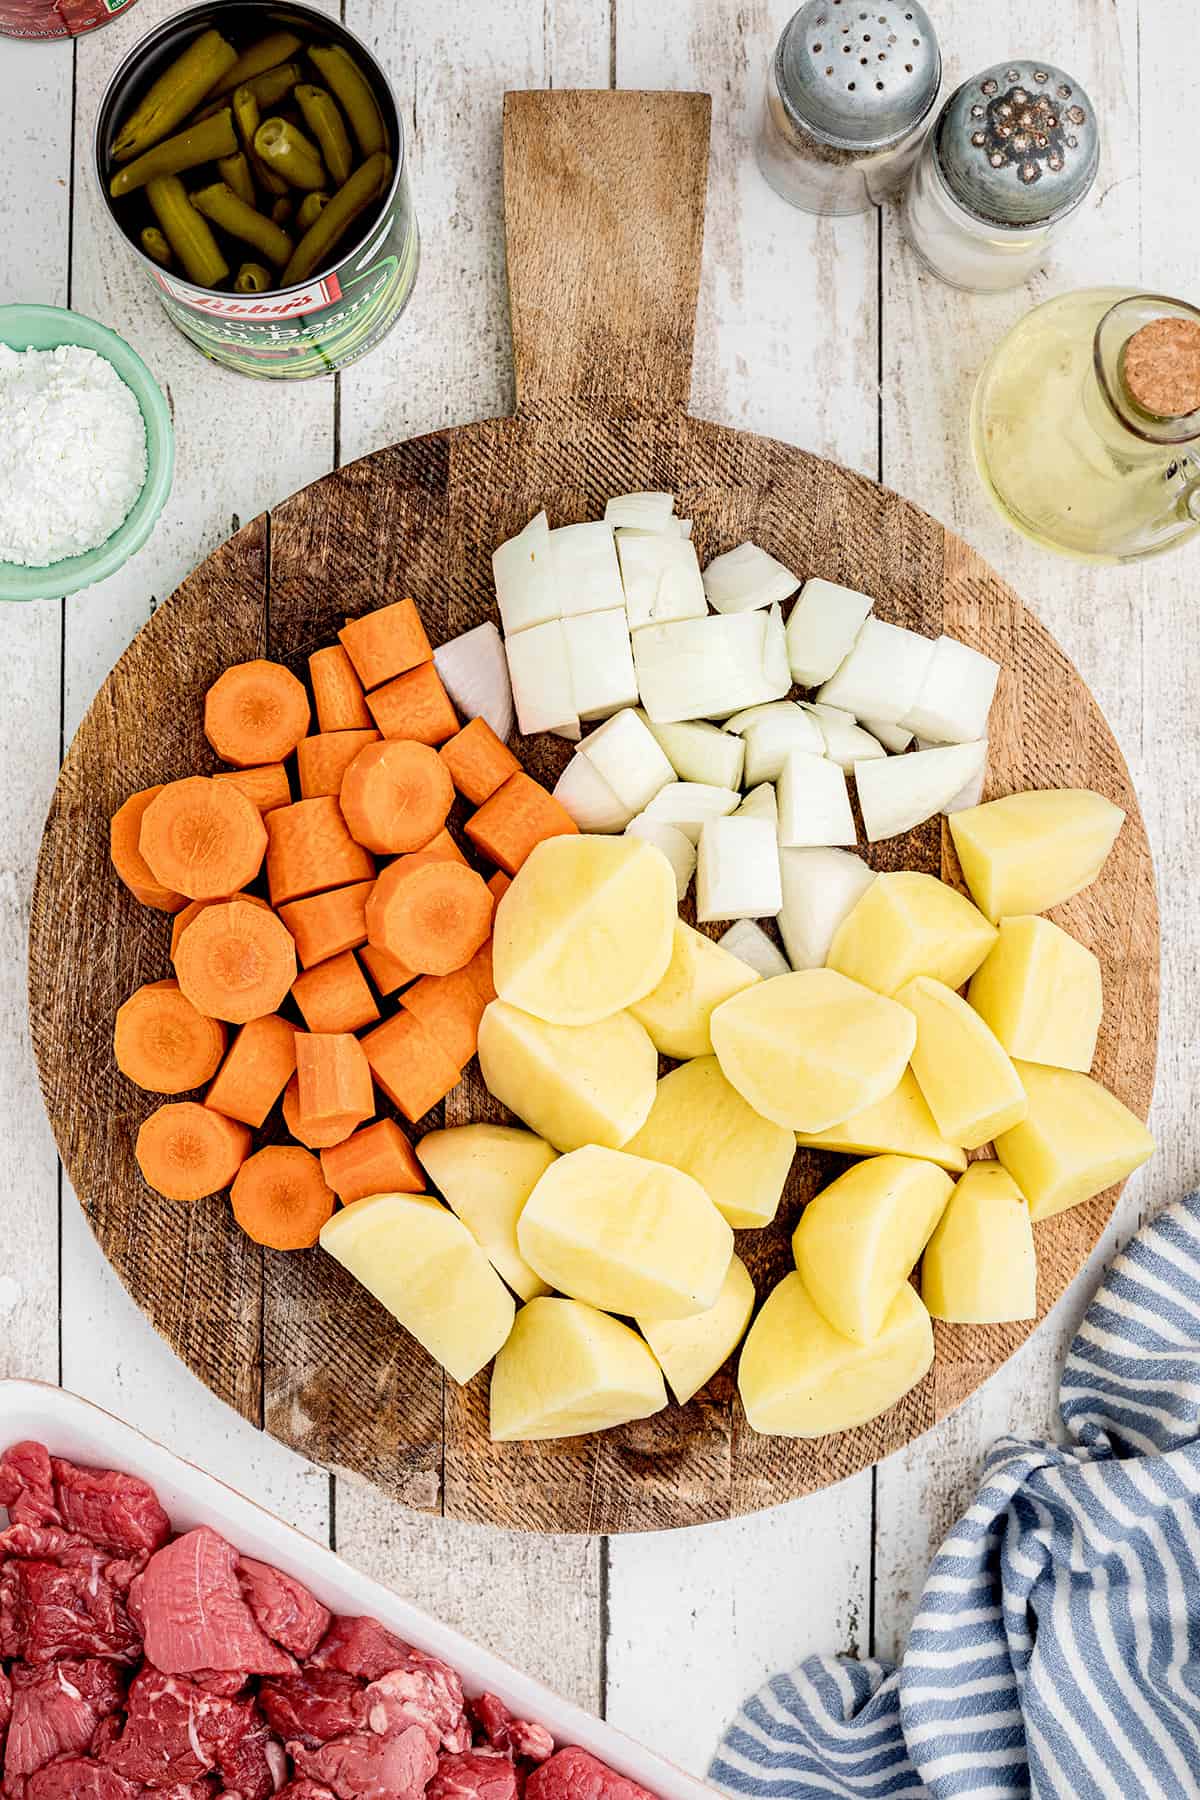 Cubed and diced vegetables on a cutting board.